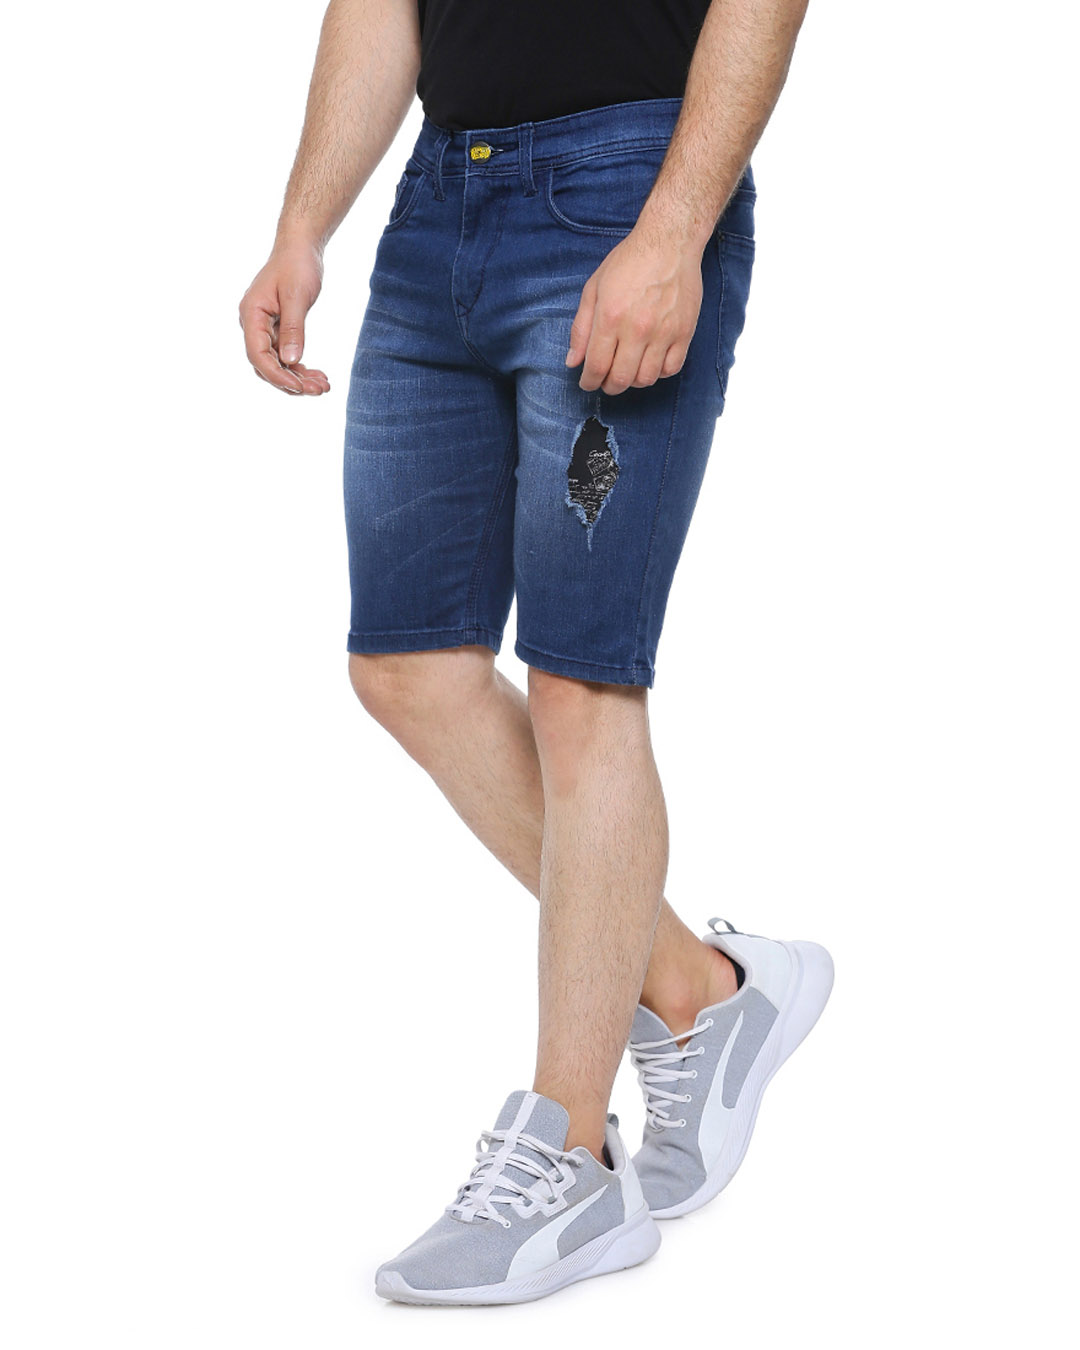 Slim Ripped Cut-Off Jean Shorts -- 9.5-inch inseam | Old Navy